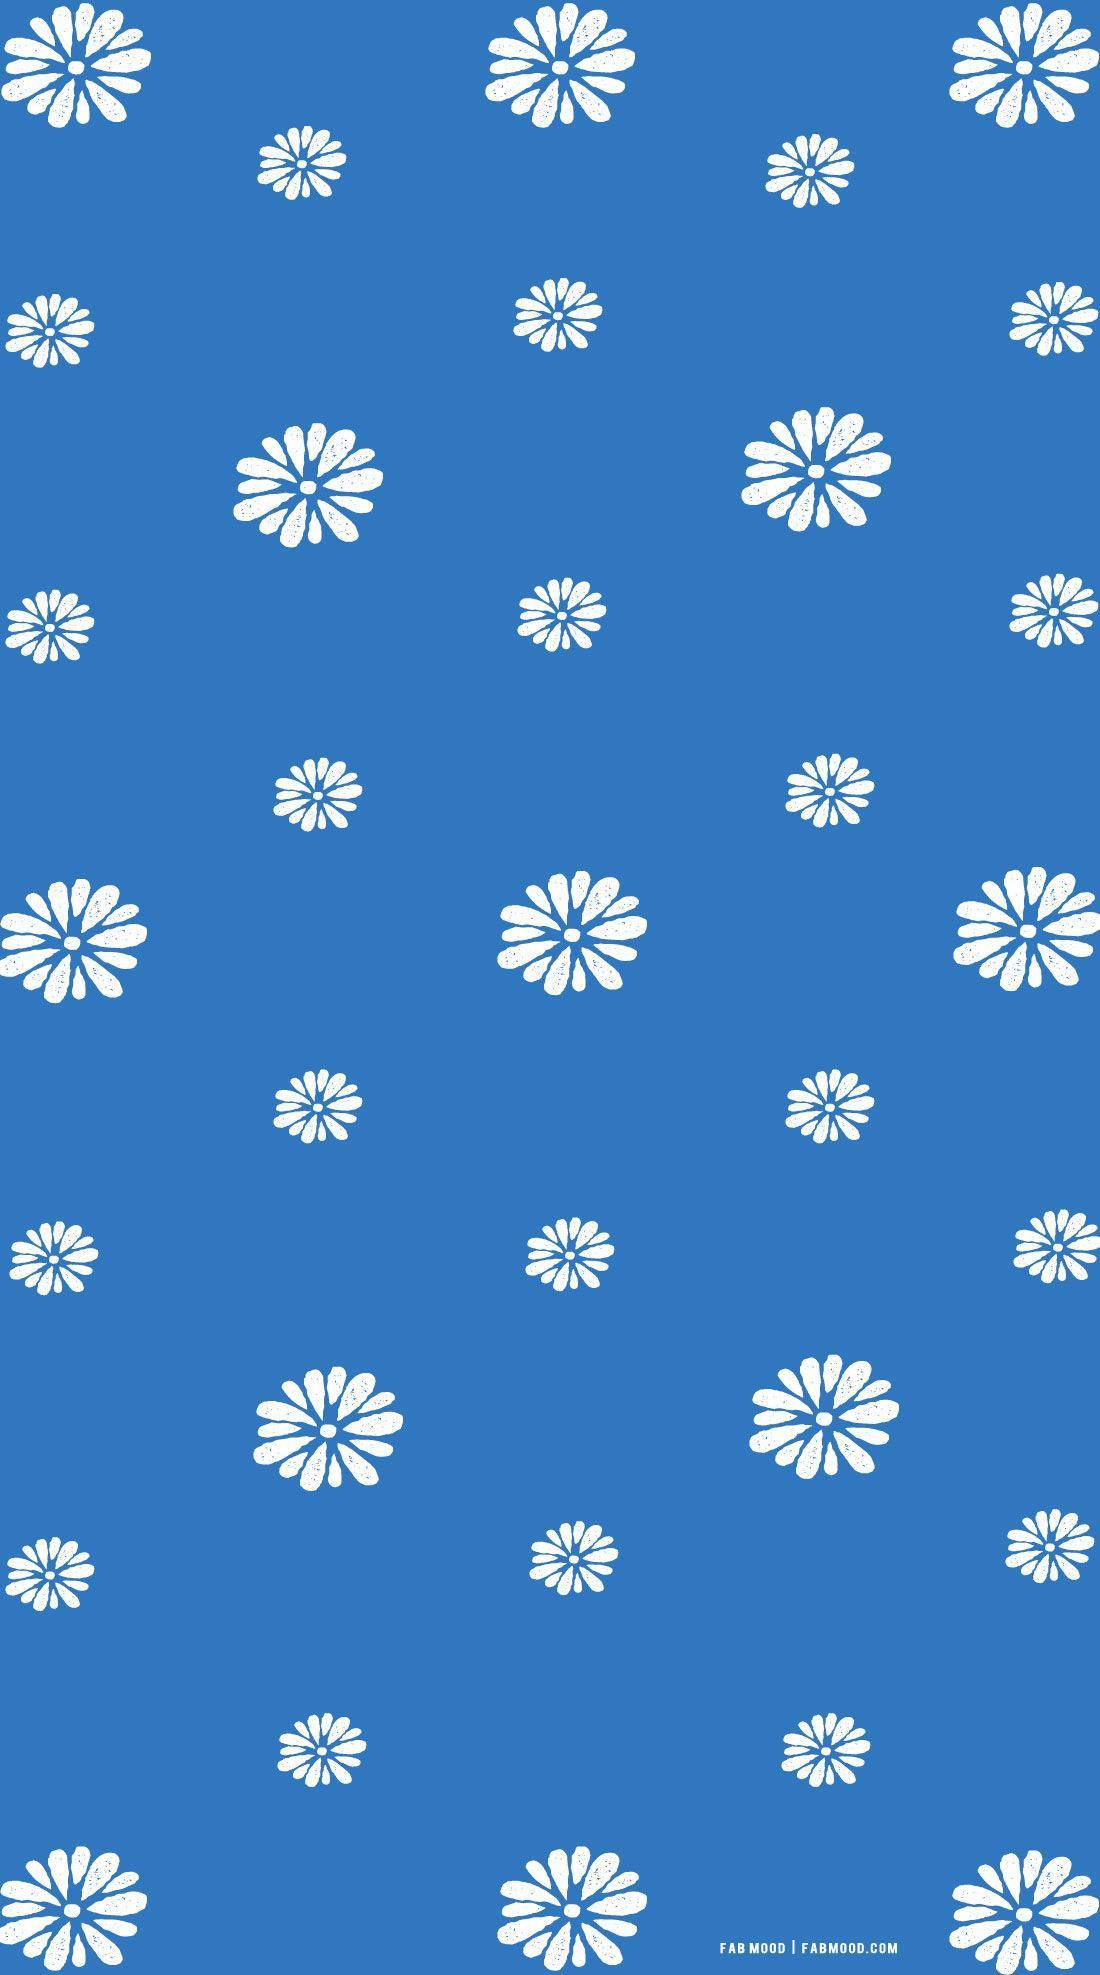 Blue and white flower pattern wallpaper for your iPhone from the 1920x1080 - Daisy, November, illustration